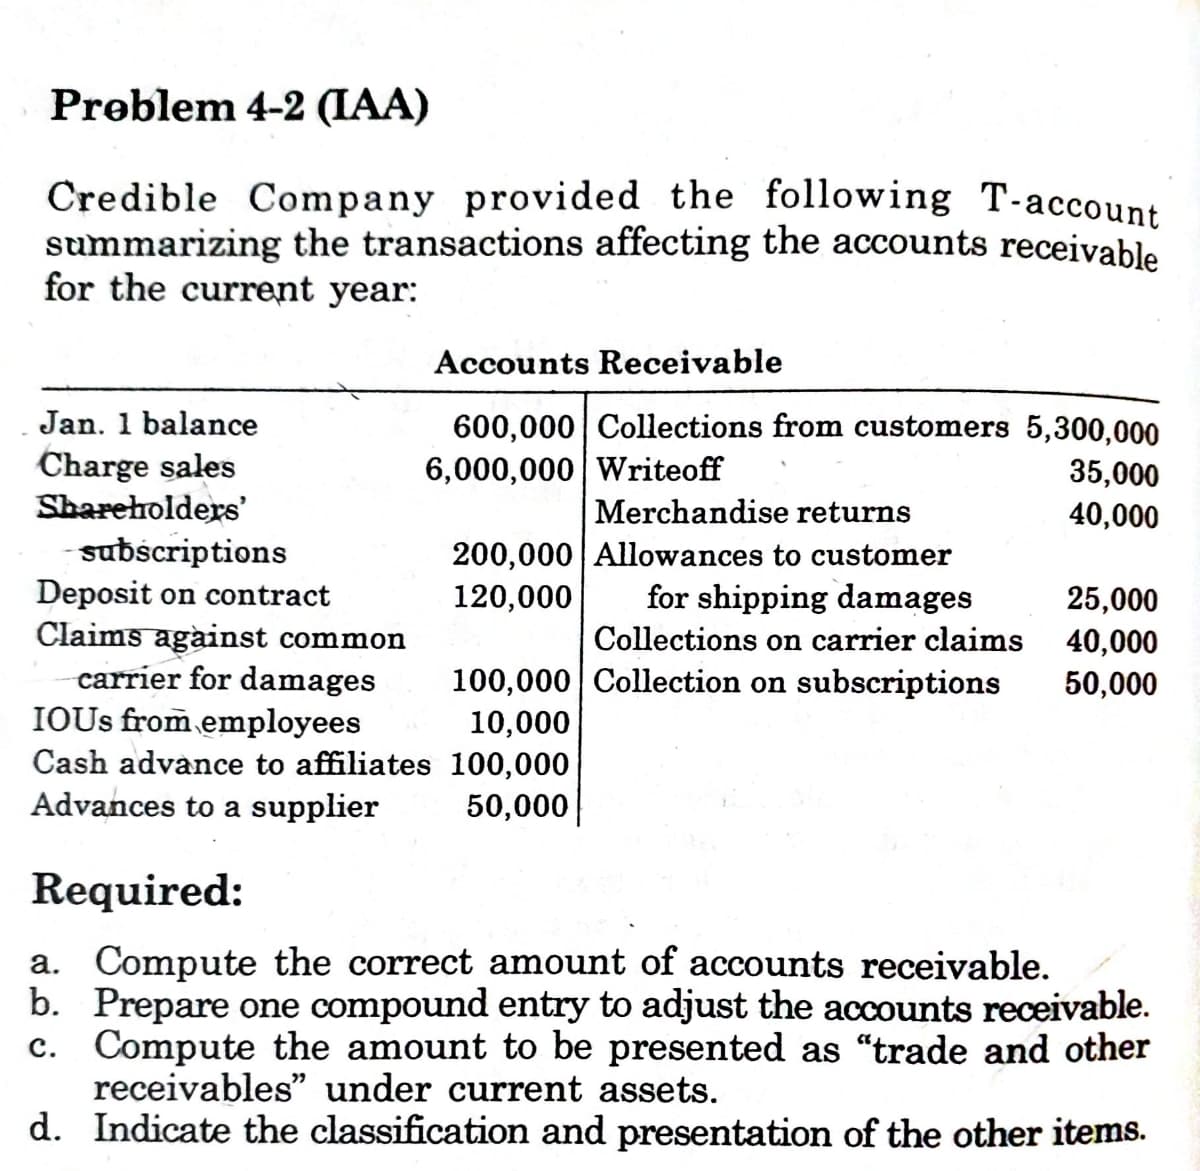 Preblem 4-2 (IAA)
Credible Company provided the following T-account
summarizing the transactions affecting the accounts receivable
for the current year:
Accounts Receivable
600,000 Collections from customers 5,300,000
6,000,000 Writeoff
Jan. 1 balance
Charge sales
Shareholders'
- subscriptions
Deposit on contract
Claims against common
carrier for damages
IOUS from employees
Cash advance to affiliates 100,000
Advances to a supplier
35,000
Merchandise returns
40,000
200,000| Allowances to customer
for shipping damages
120,000
25,000
Collections on carrier claims
40,000
100,000 Collection on subscriptions
50,000
10,000
50,000
Required:
a. Compute the correct amount of accounts receivable.
b. Prepare one compound entry to adjust the accounts receivable.
c. Compute the amount to be presented as "trade and other
receivables" under current assets.
d. Indicate the classification and presentation of the other items.
